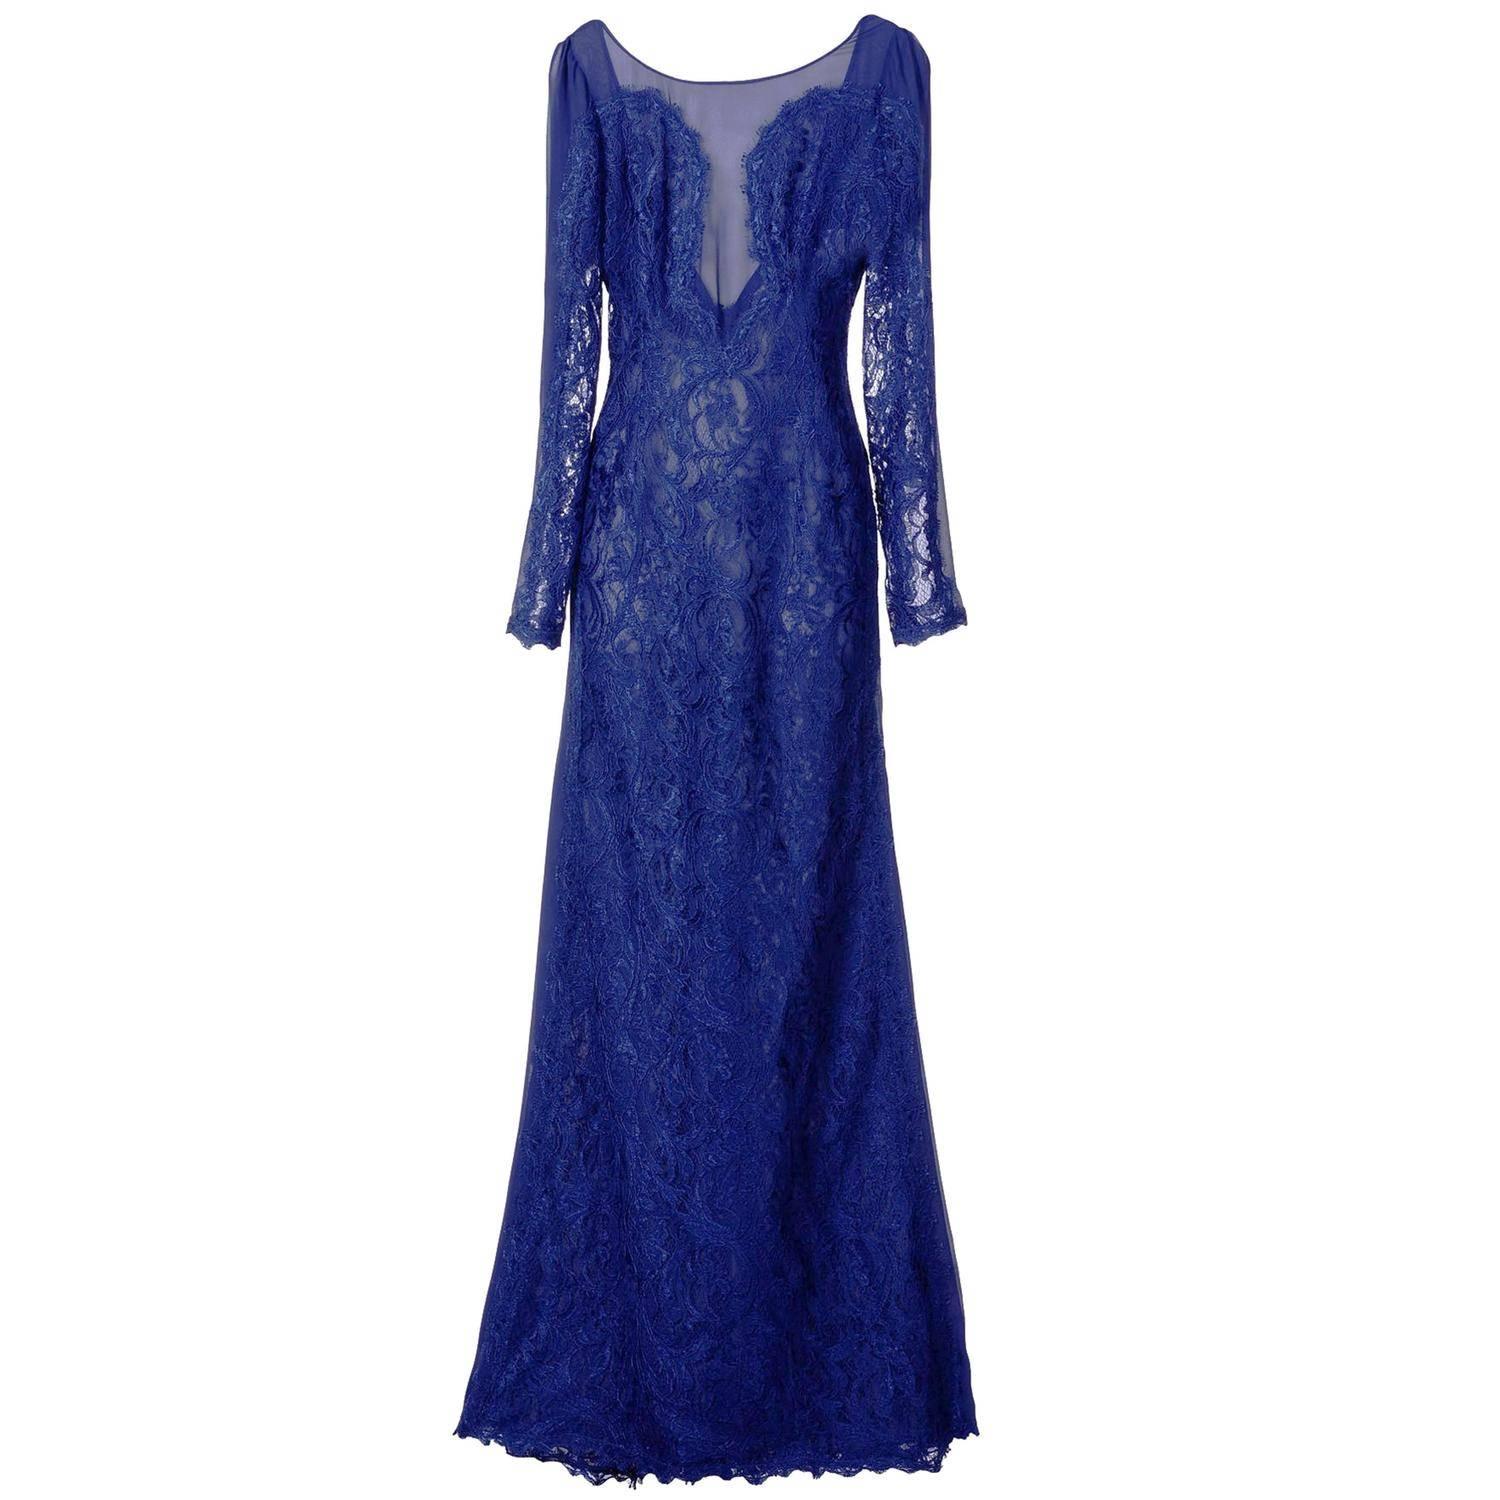 New Emilio Pucci Lace Cheer Blue Dress Gown It. 40 - US 4